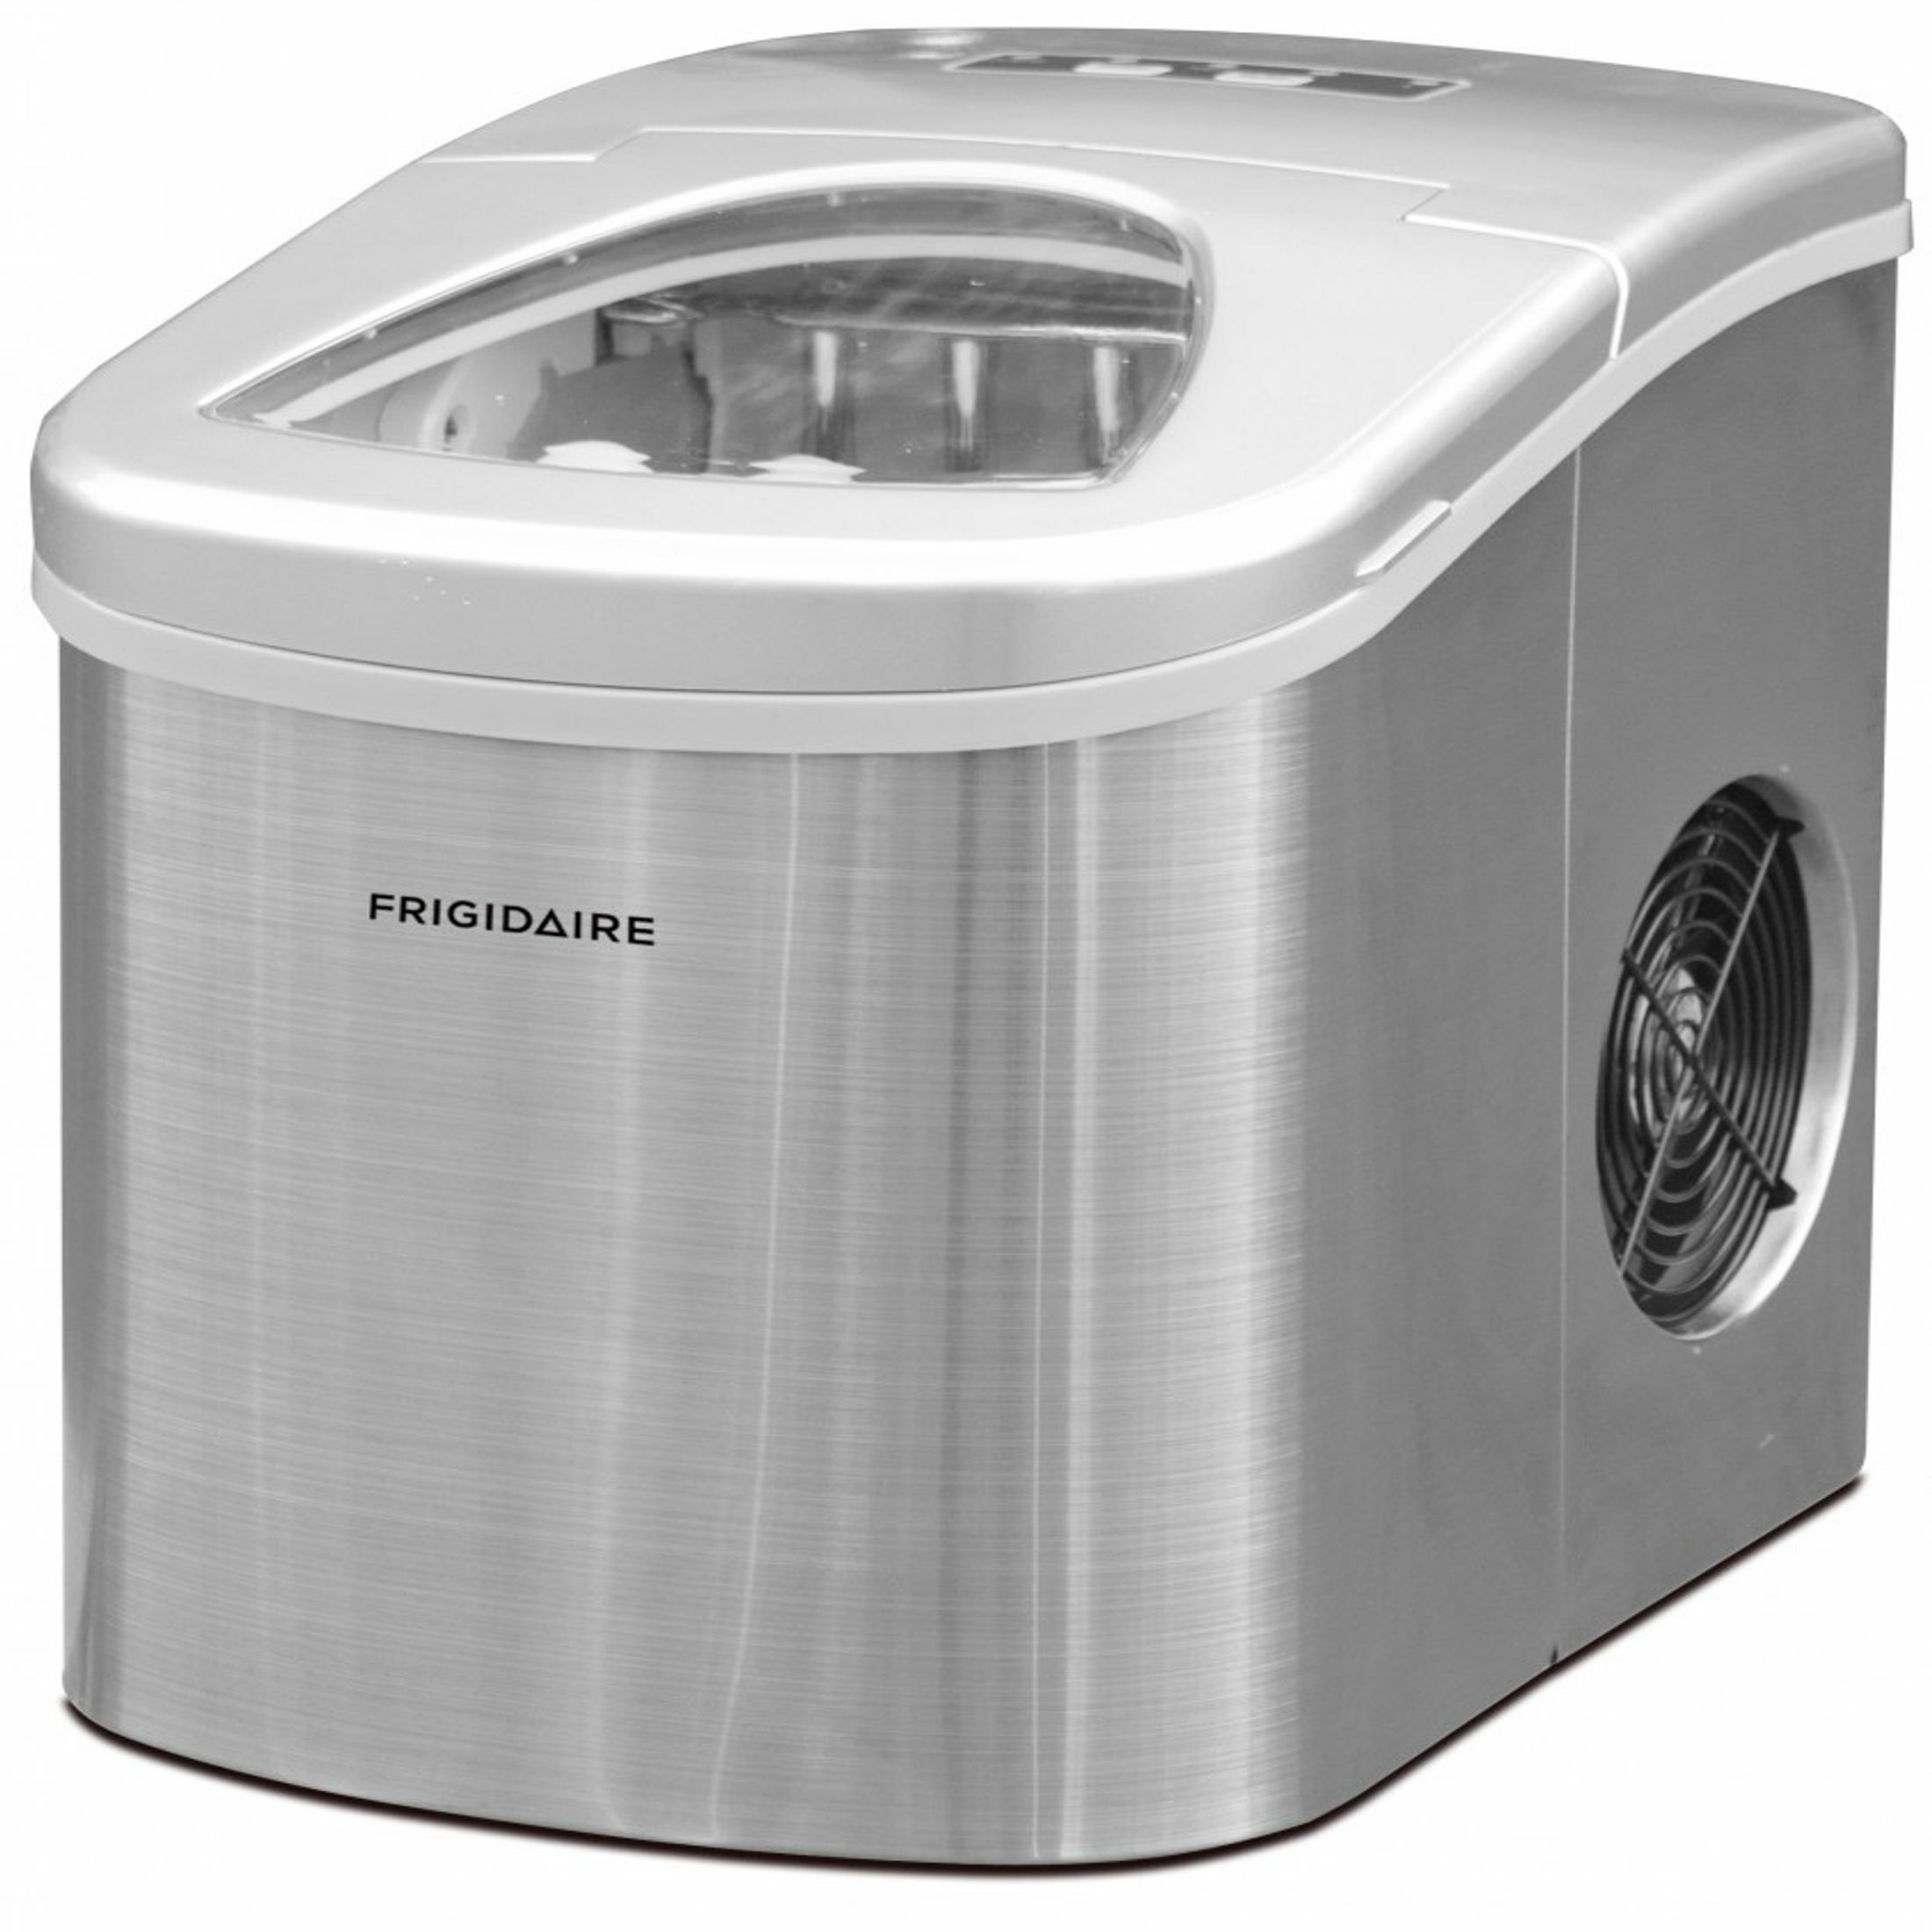 FRIGIDAIRE 2.3 Qt. Stainless-Steel Counter Top Ice Maker - Stainless-Steel - image 1 of 4